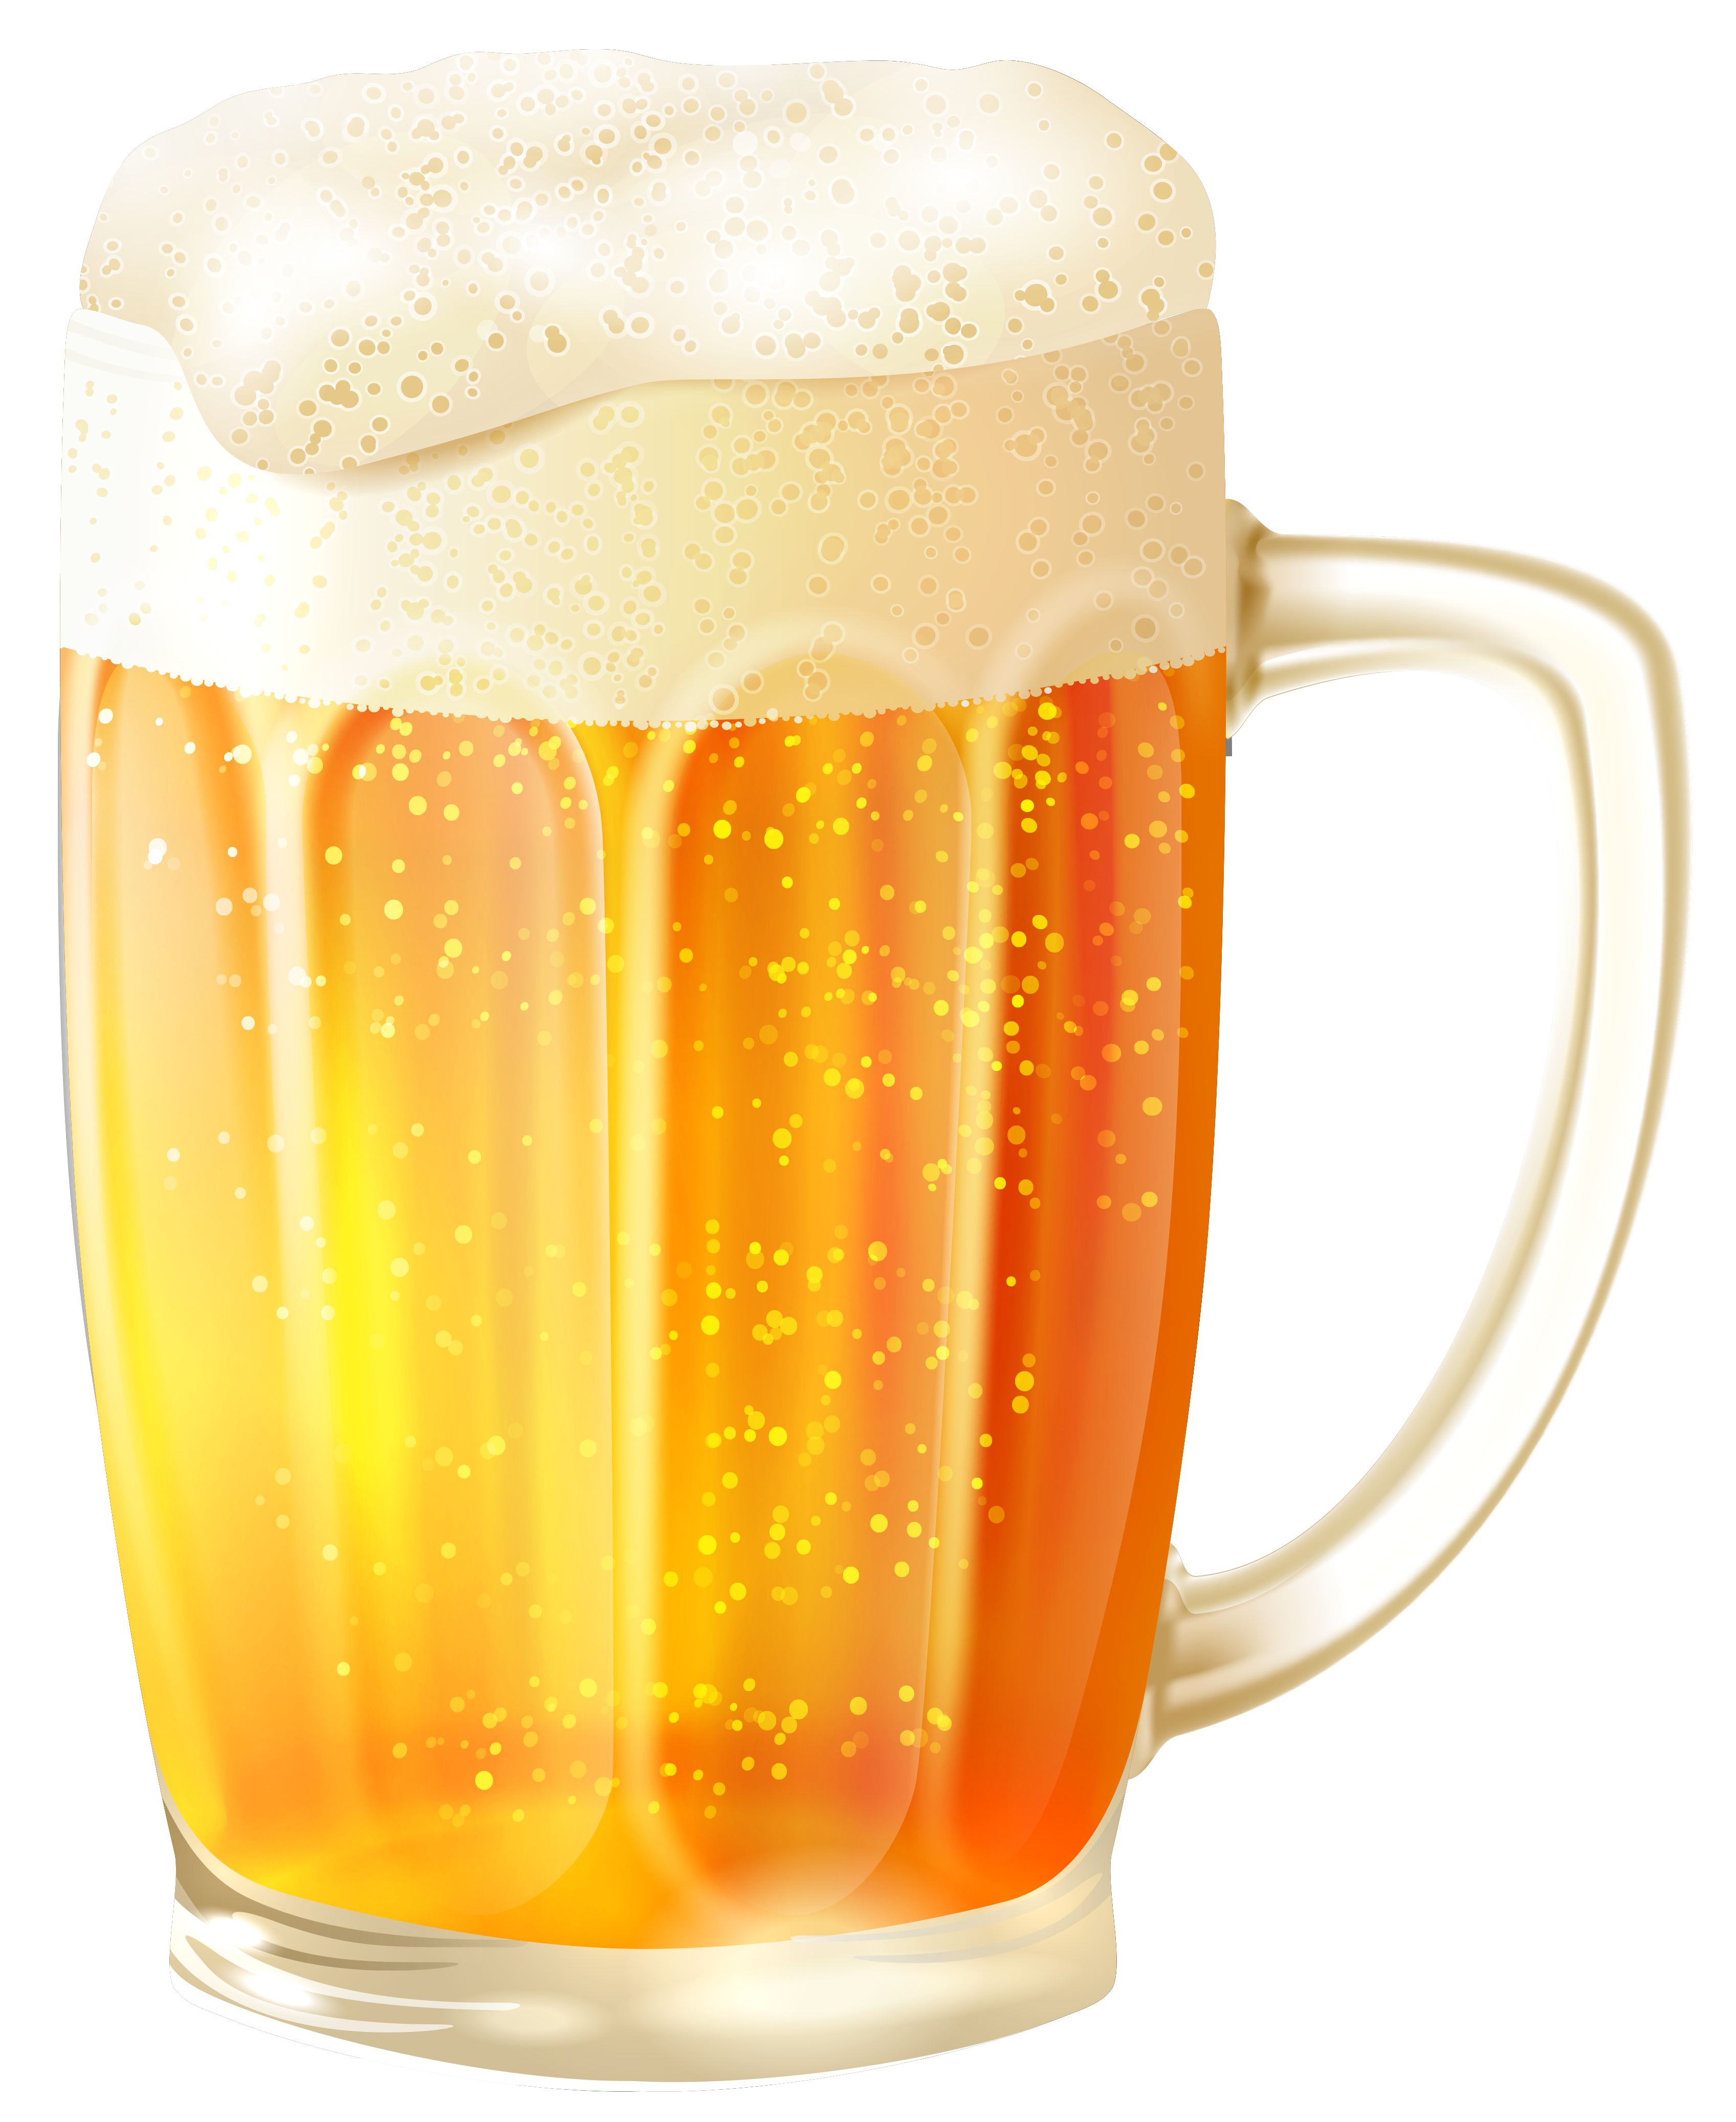 Beer Vector With Glassware Mug Free HD Image Clipart